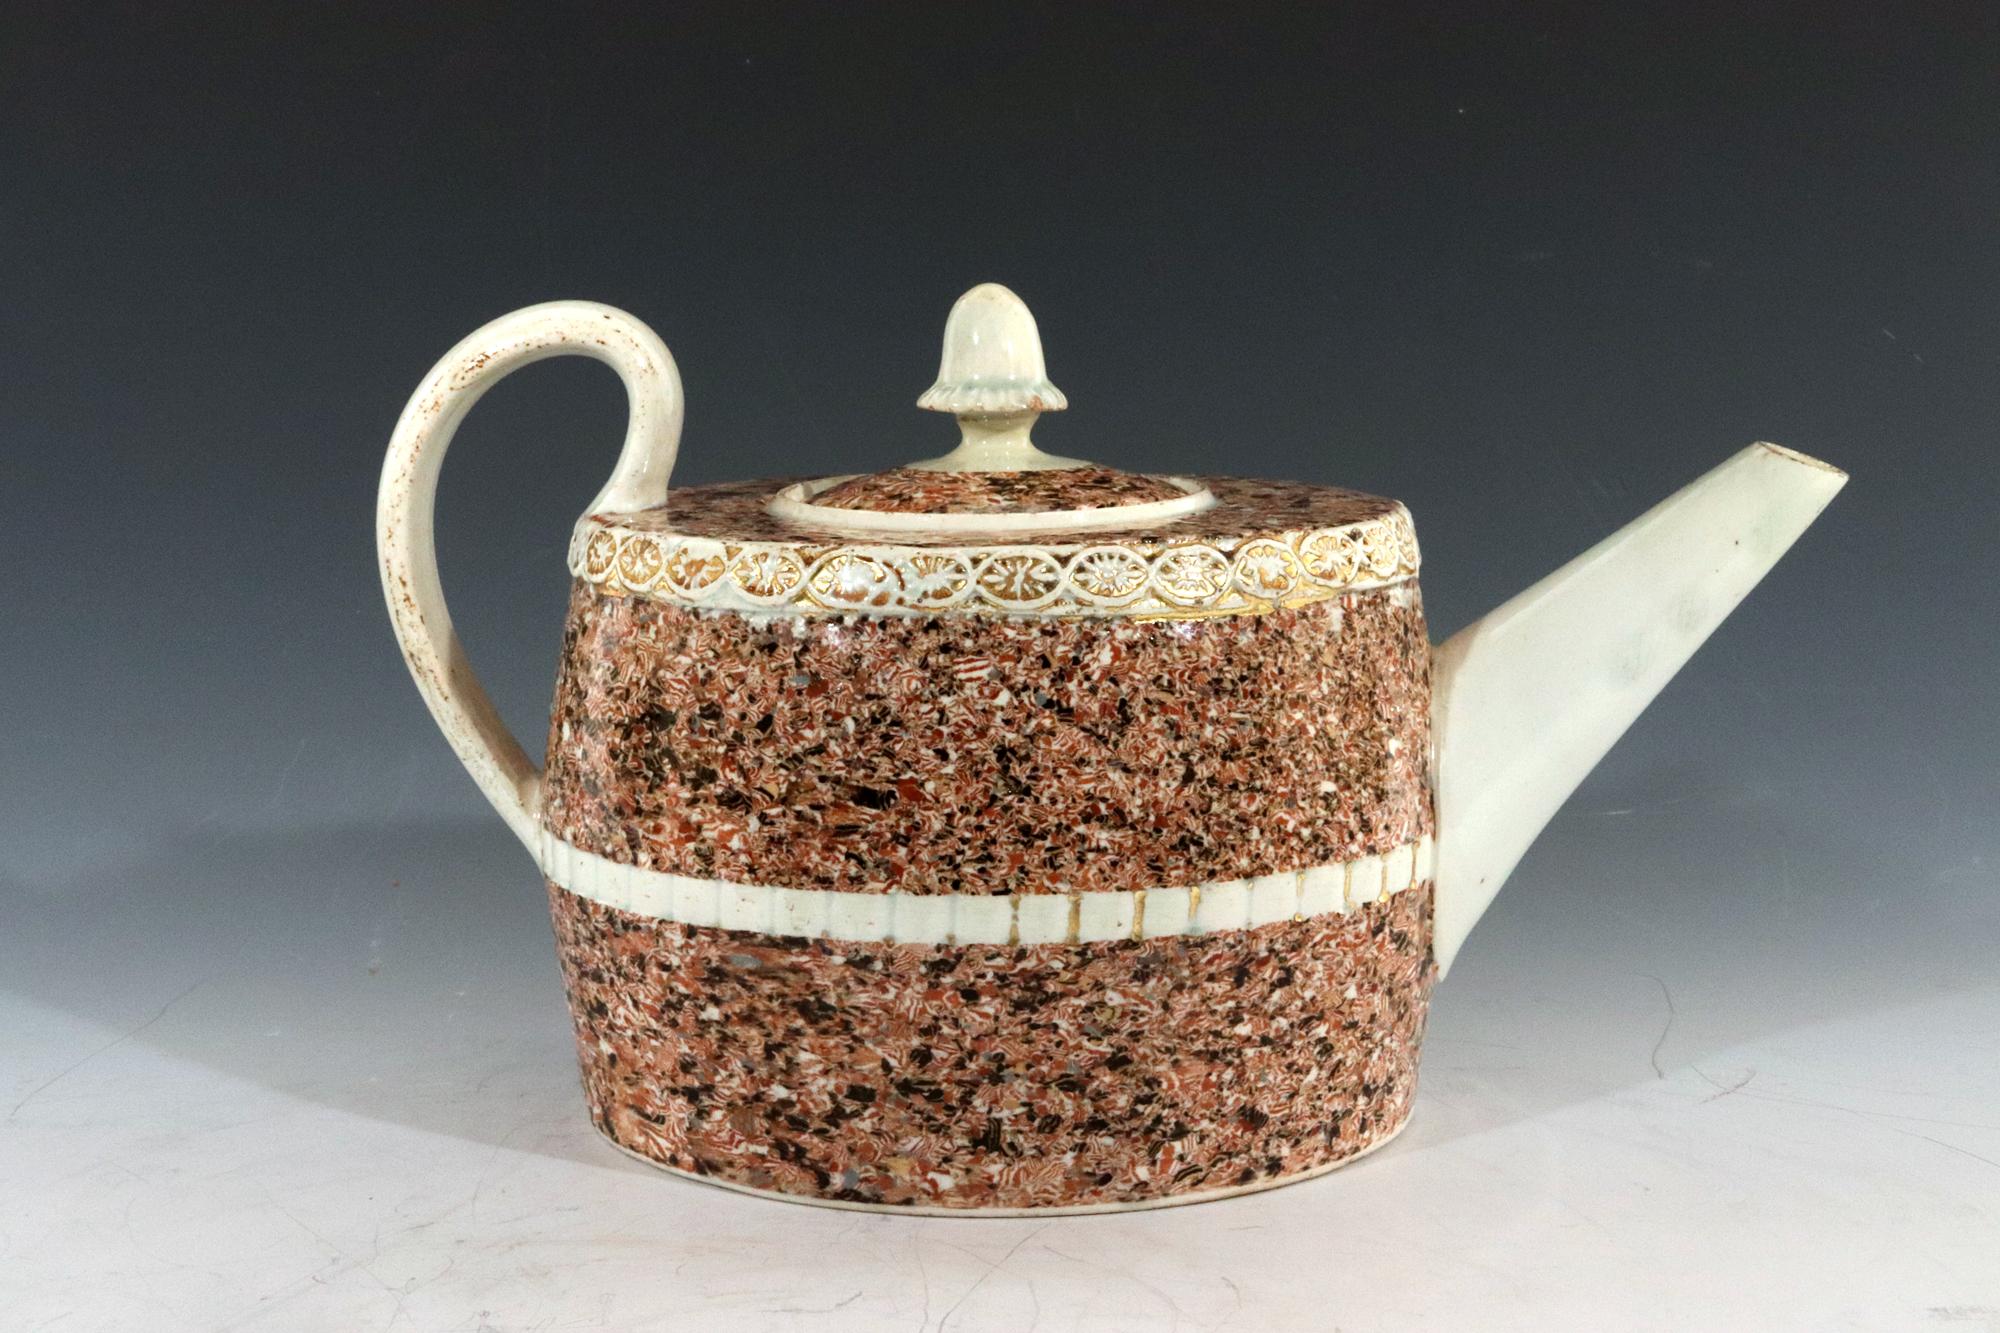 Staffordshire Pearlware Teapot and Cover with Inlaid Agate Surface and Acorn Finial, 
Attributed to the Ralph Wedgwood, 
circa 1795.

The squat oval pearlware pottery teapot has an acorn as the finial with the cover and body overlaid with